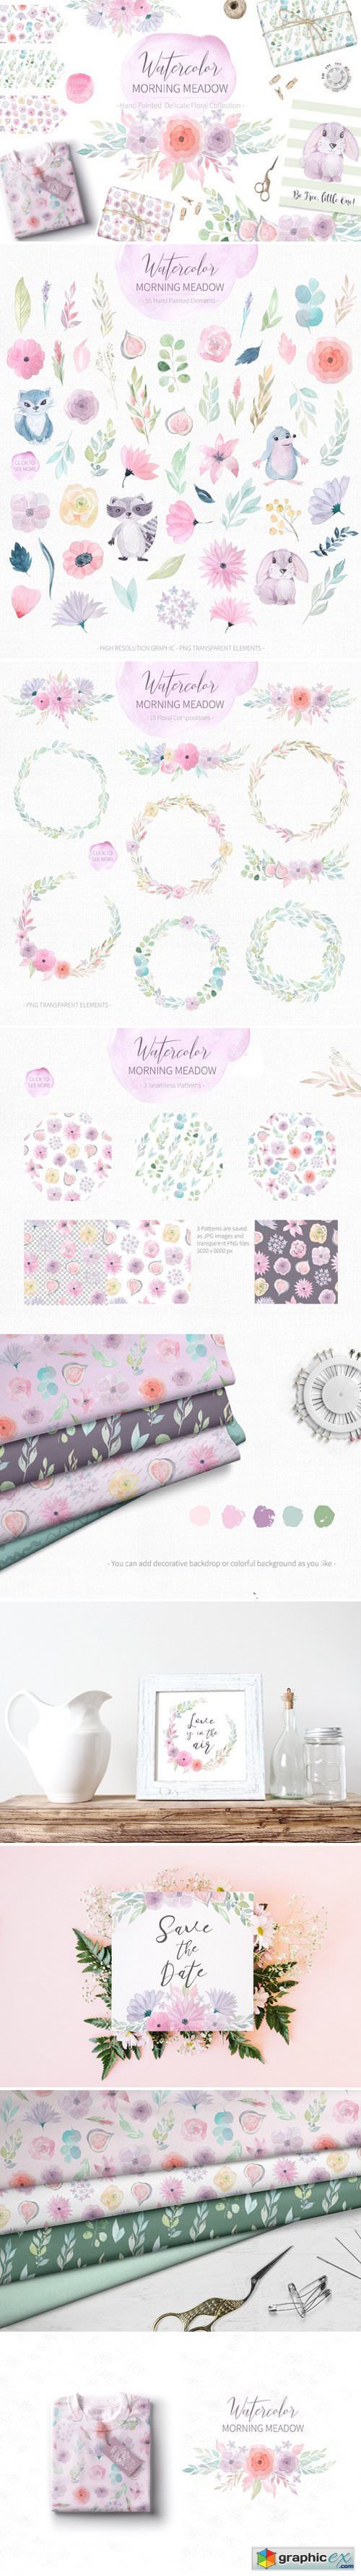 Watercolor Morning Meadow Floral Set